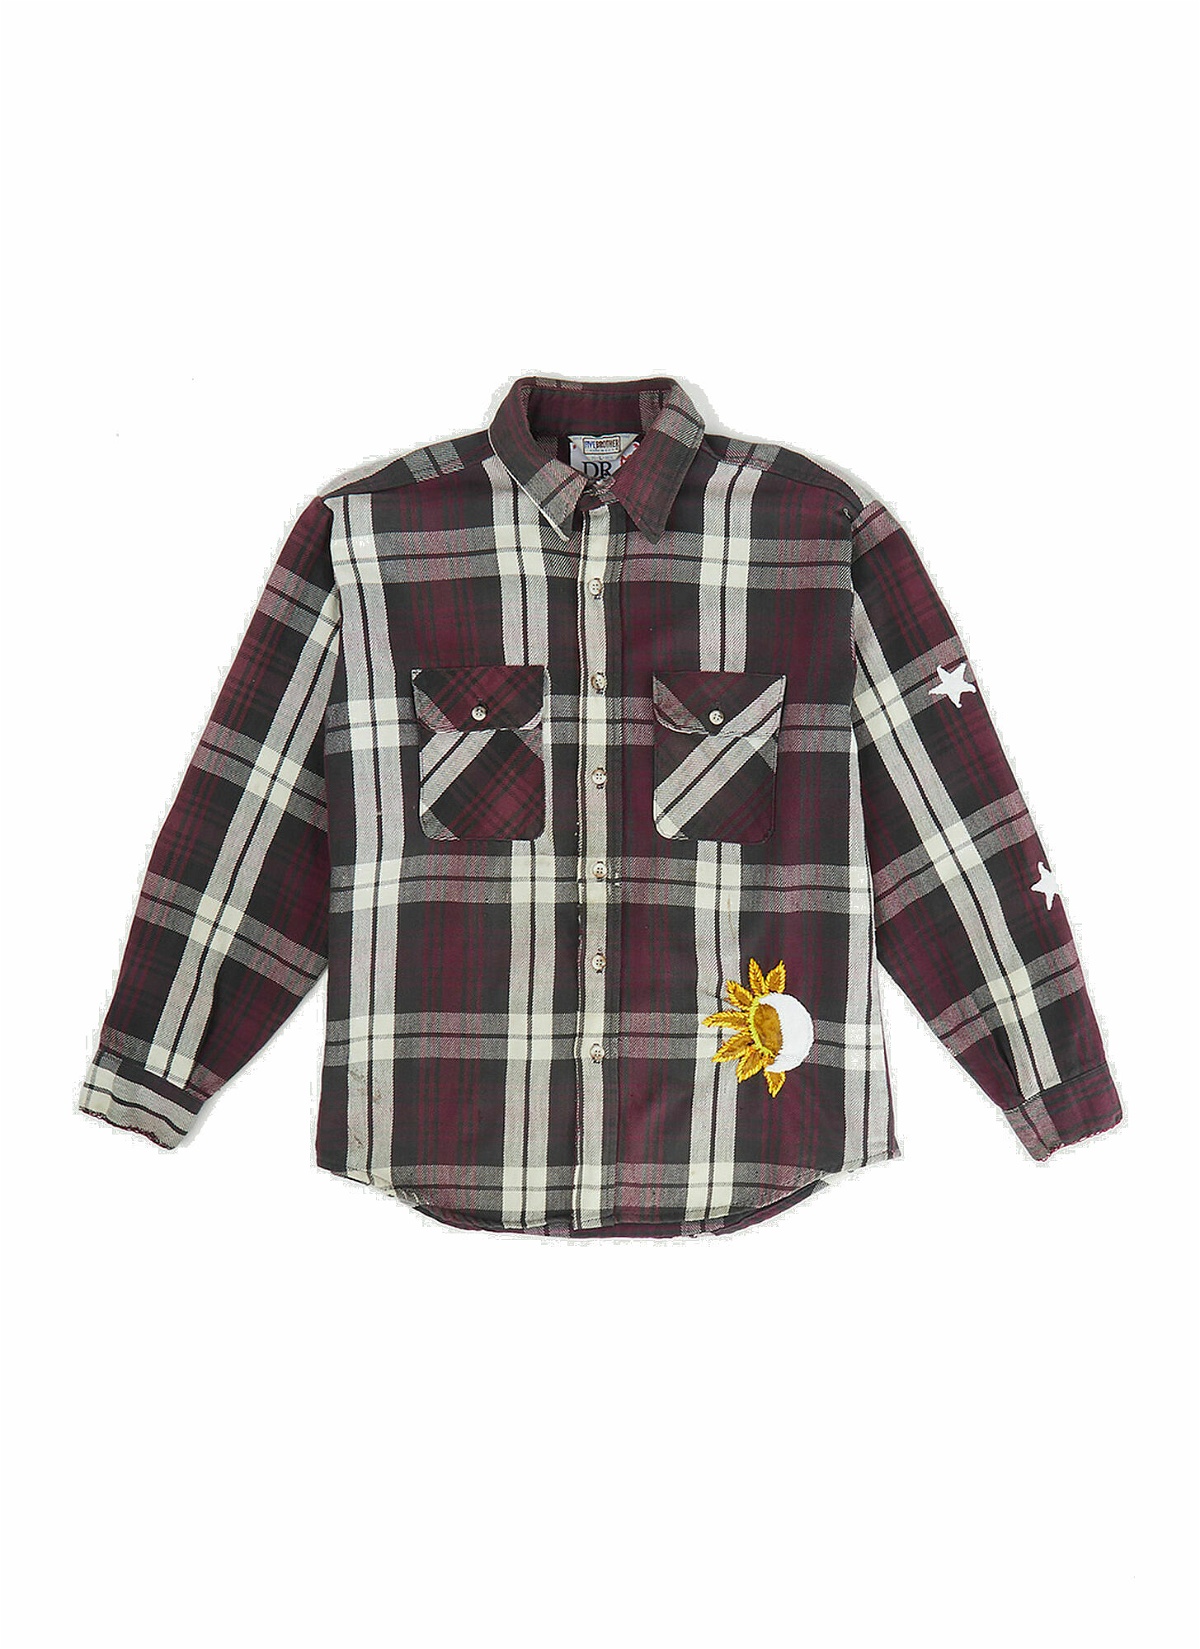 Photo: Scalloped Flannel Shirt in Burgundy